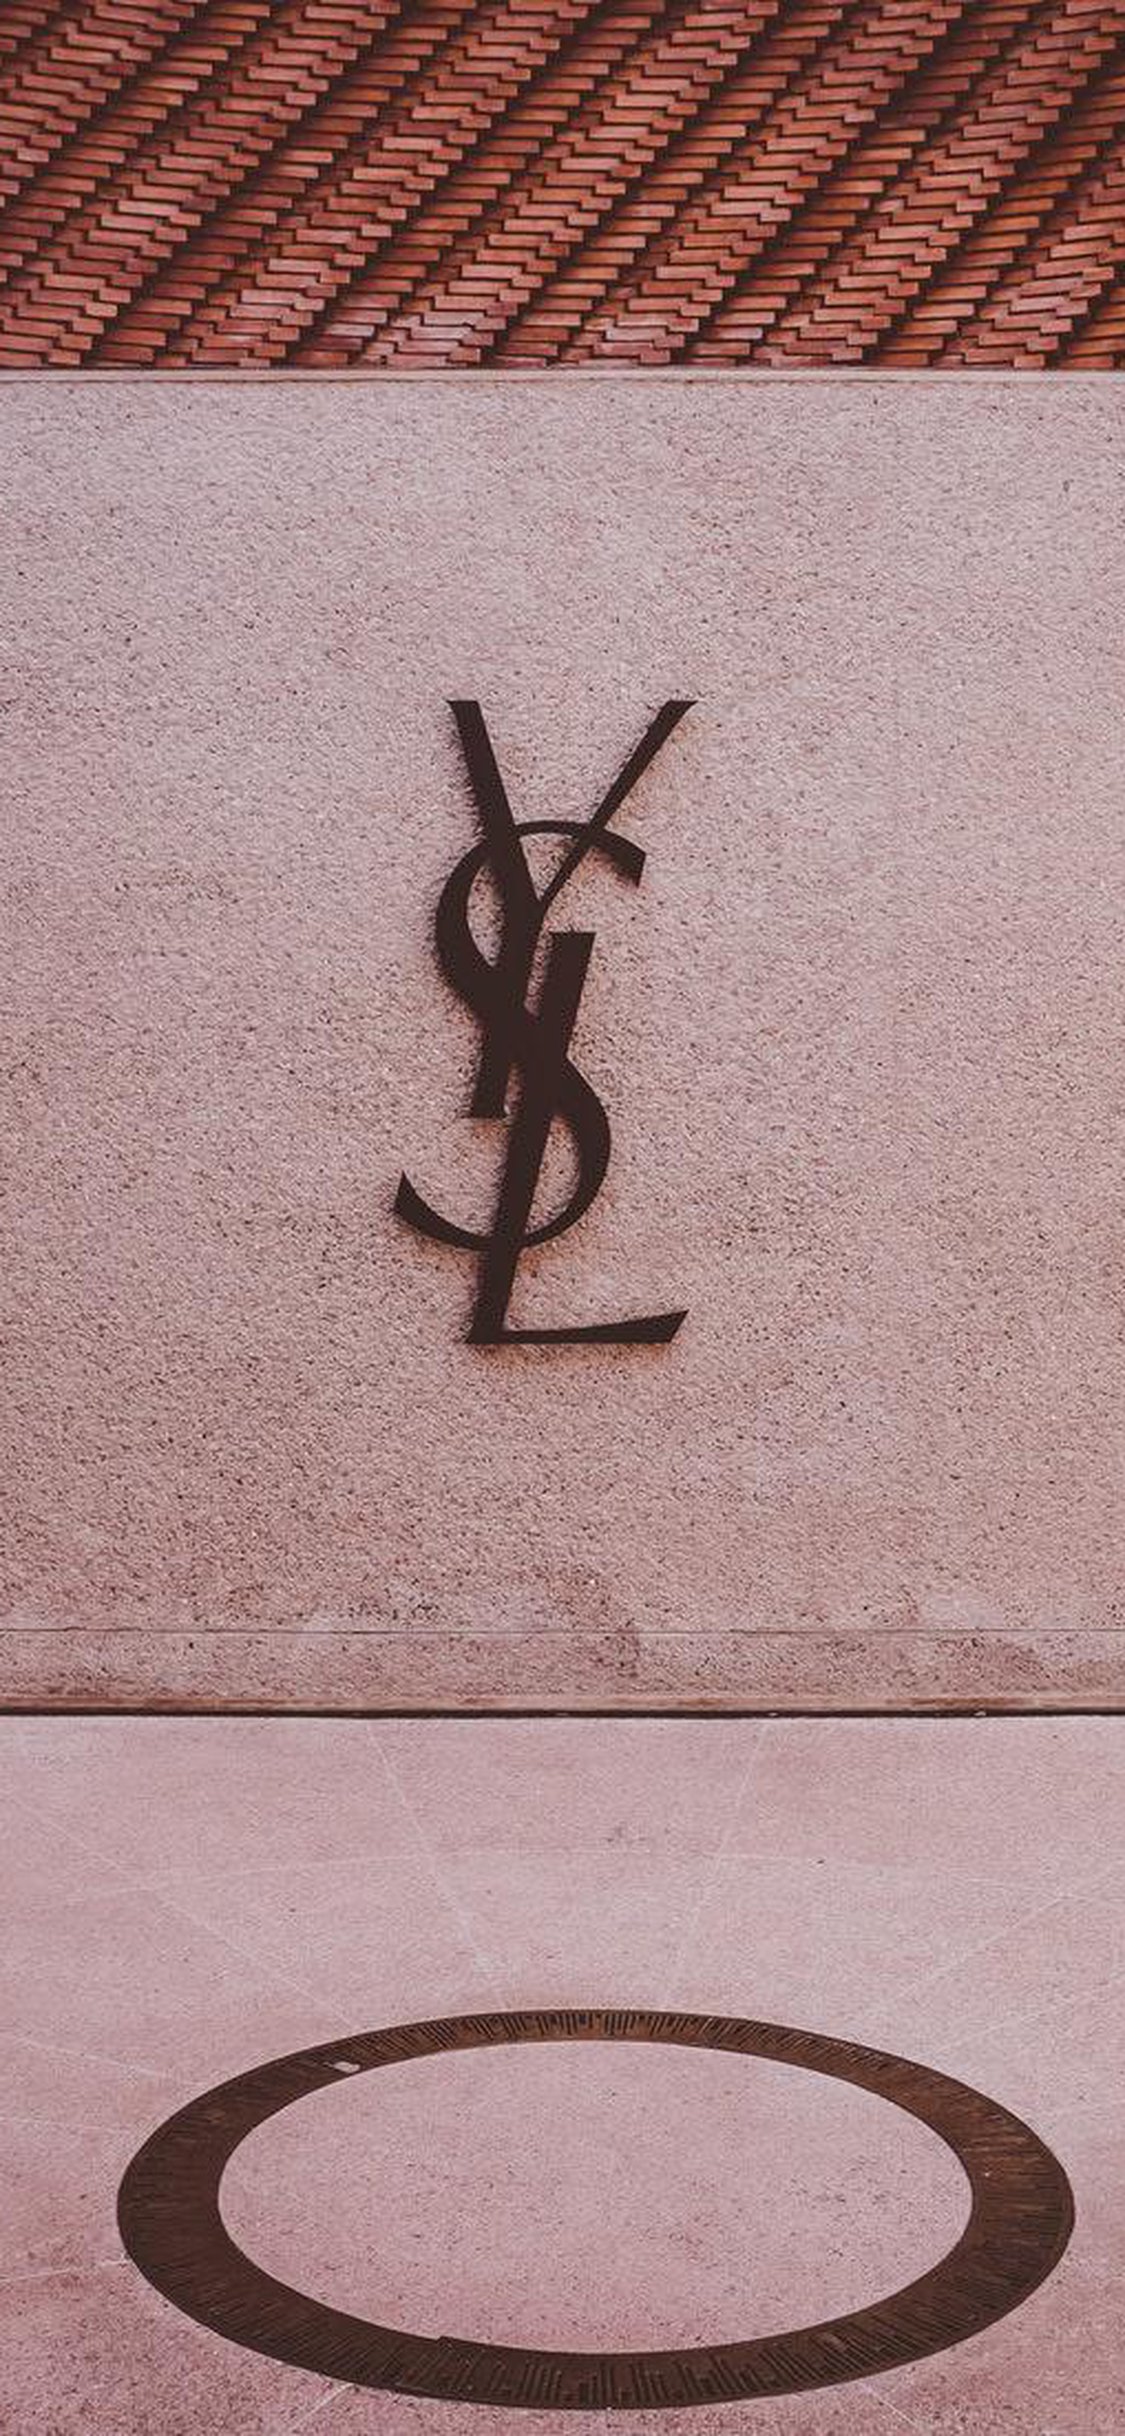 Ysl Museum Logo In Marrakech Morocco For iPhone Yves